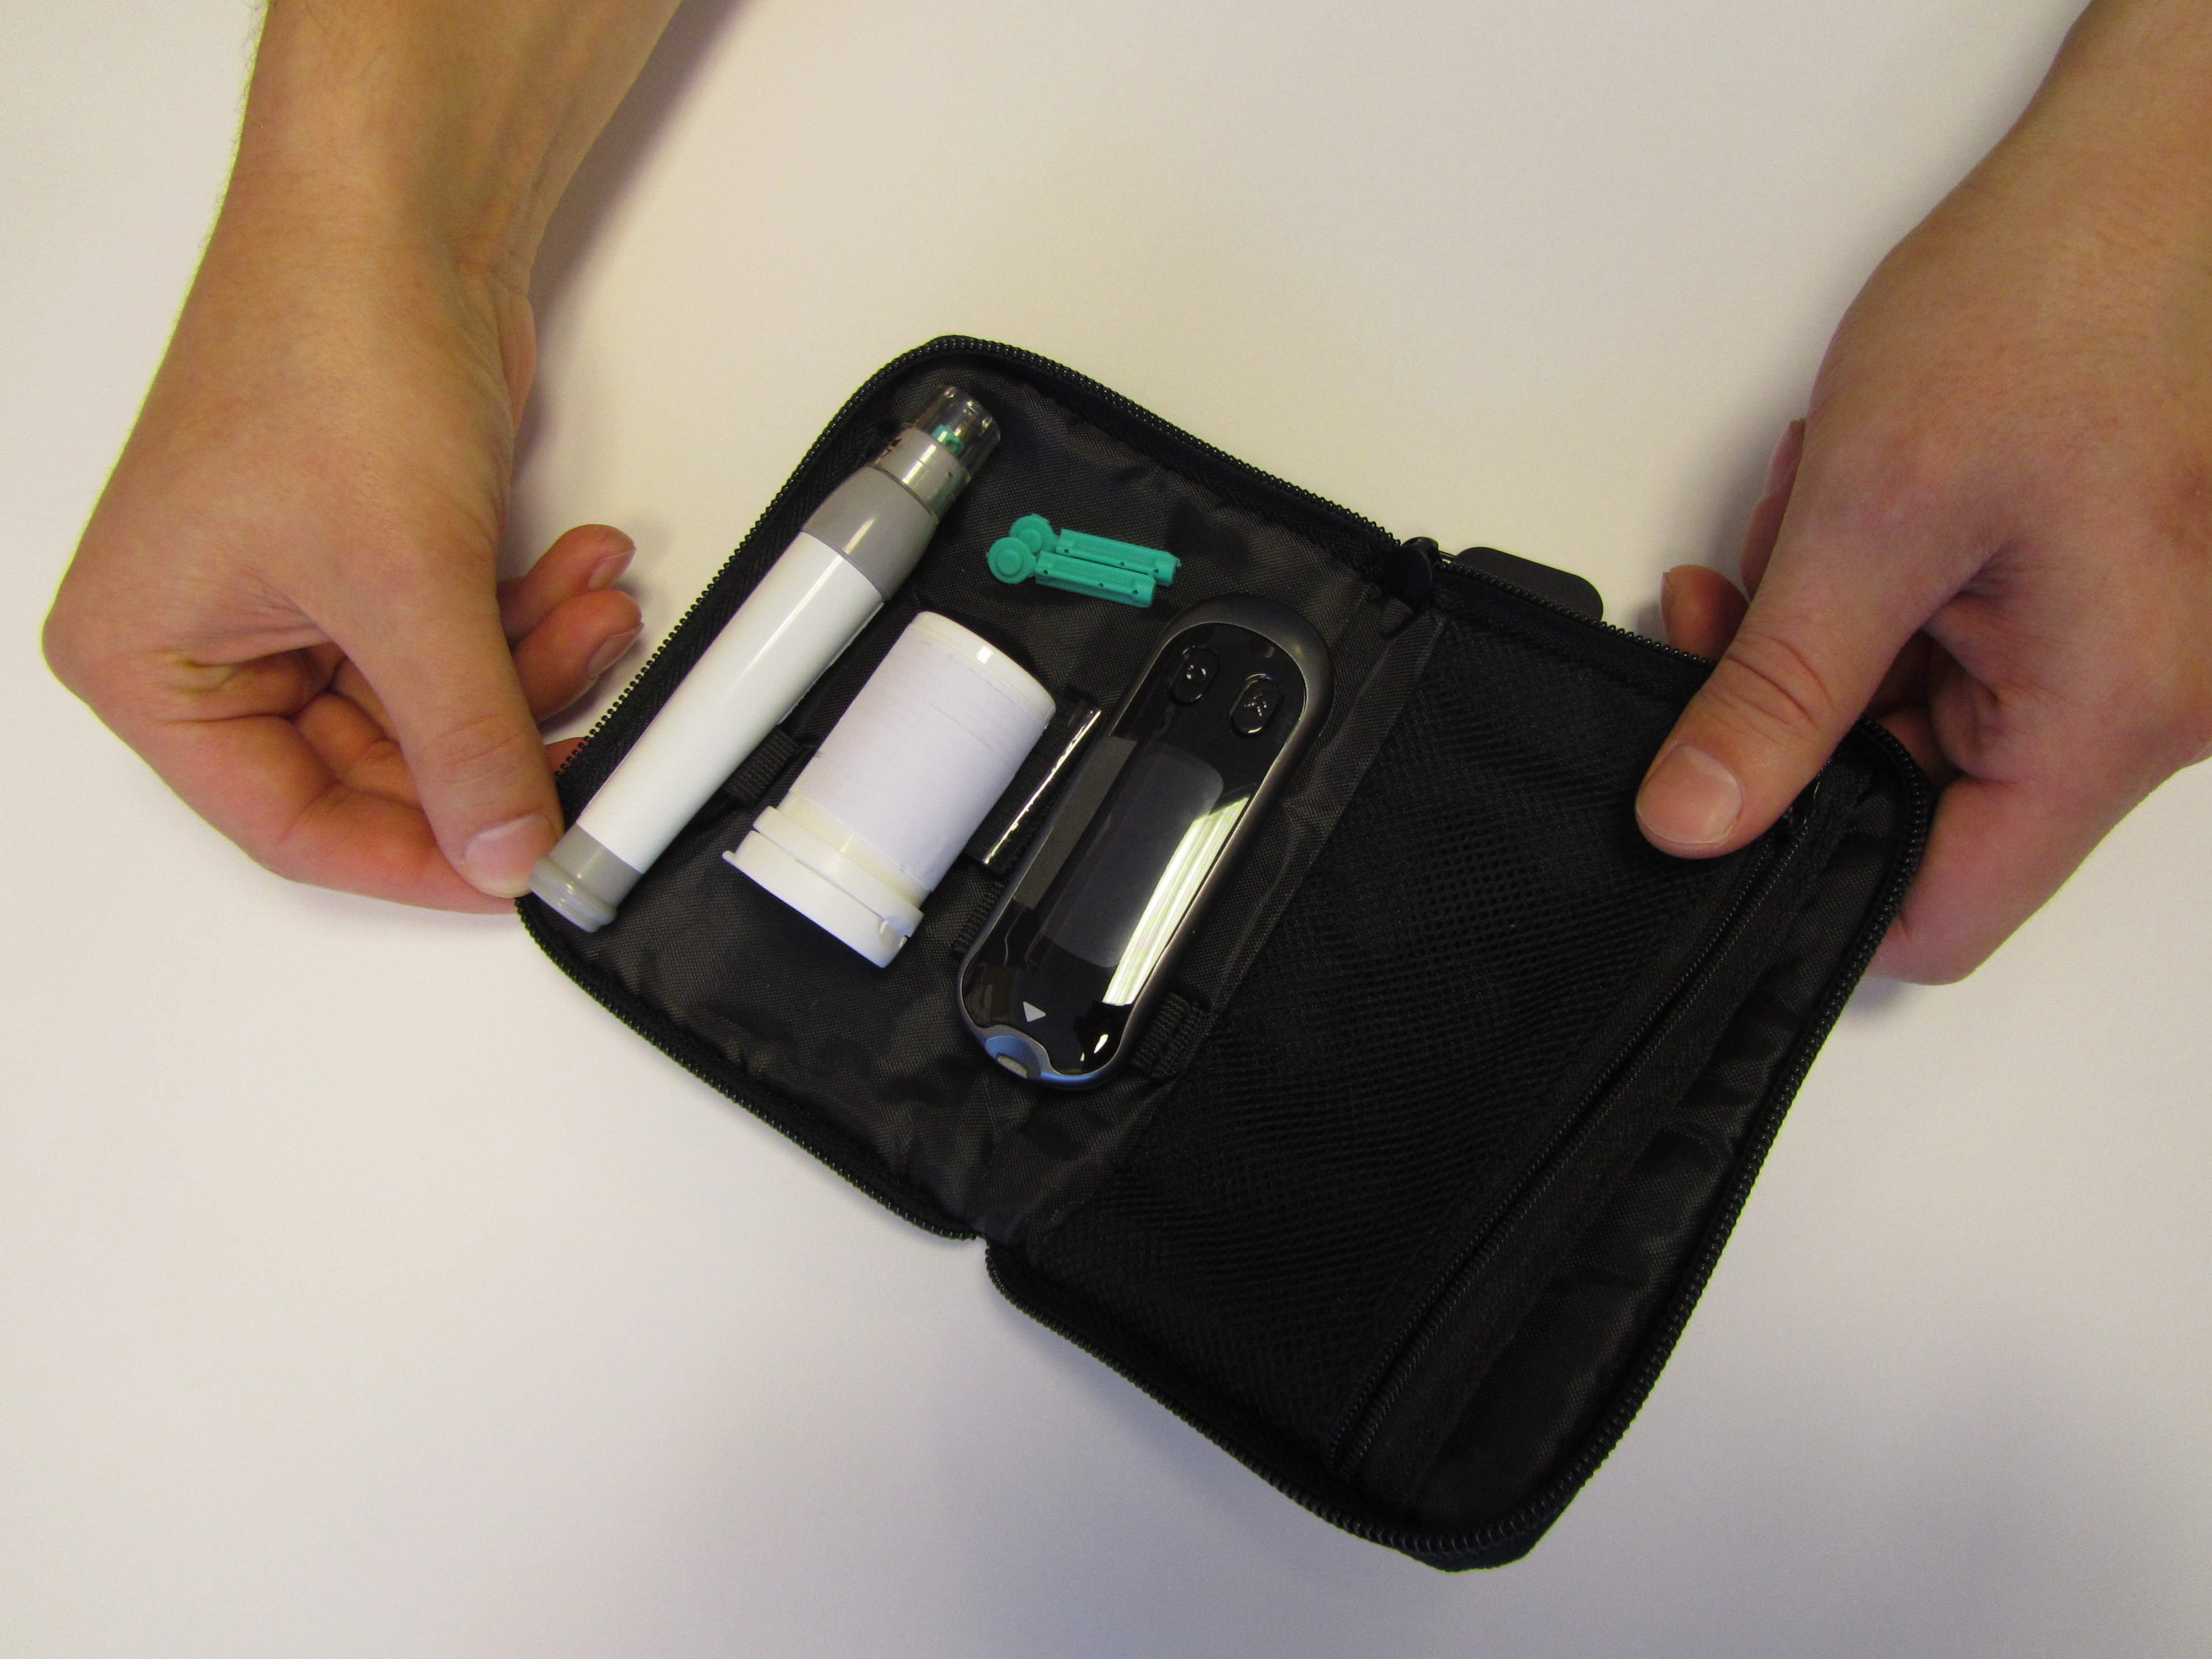  In the image is a blood glucose meter, a strip container, a lancet pen, and lancet needles in their own storage case.